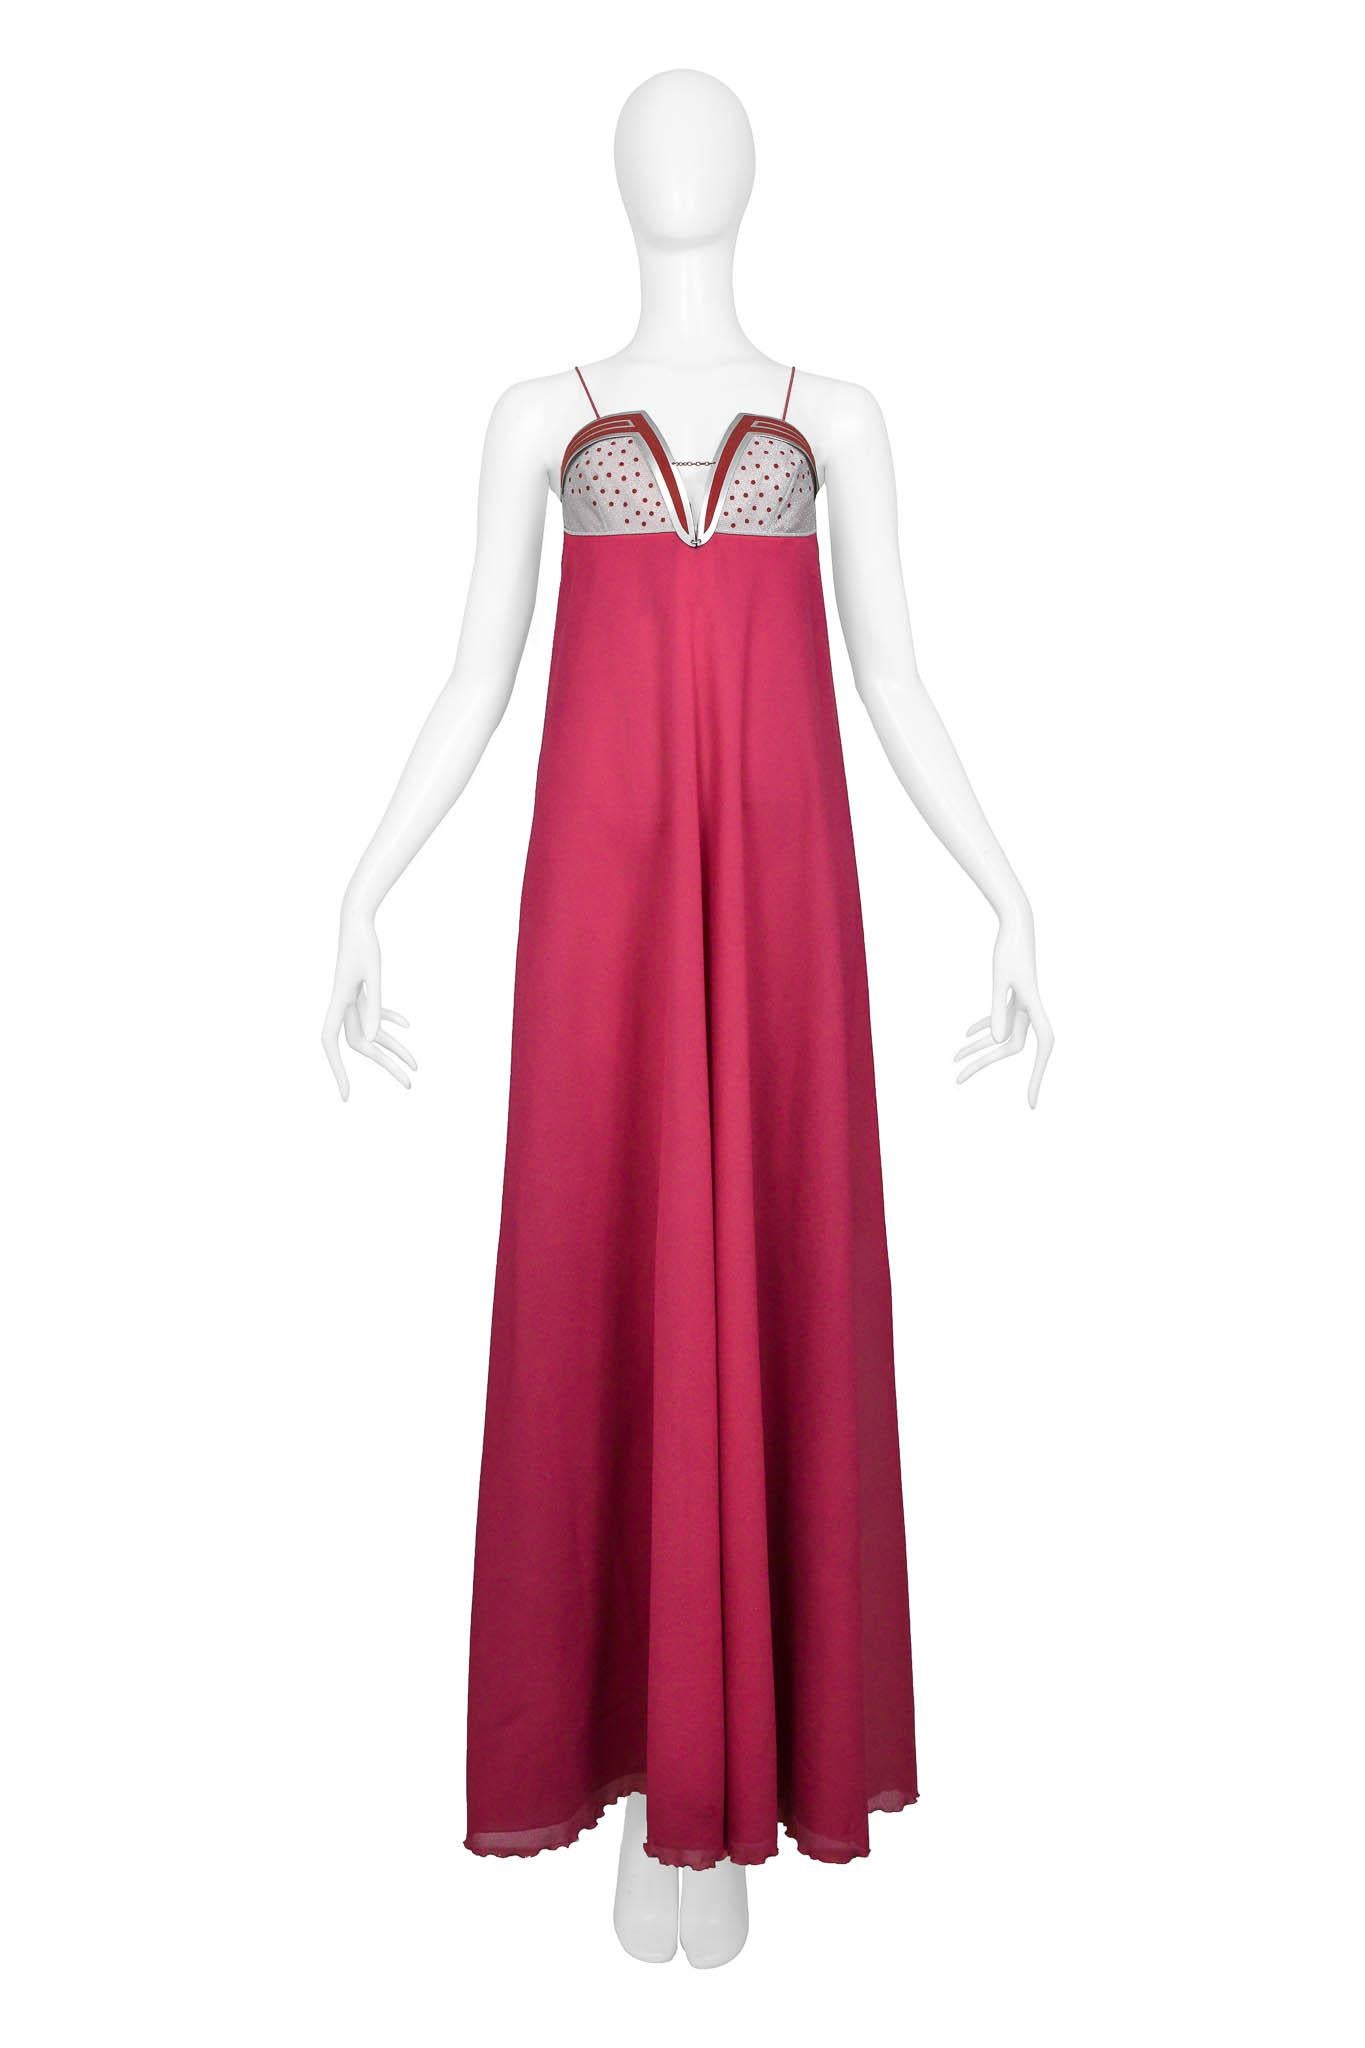 Resurrection Vintage is excited to offer a vintage Jacques Cassia pink gown featuring metal detailing, skinny straps with chain links, and a covered back zipper.

Jacques Cassia
Size: Small
Cotton
Excellent Vintage Condition
Authenticity Guaranteed